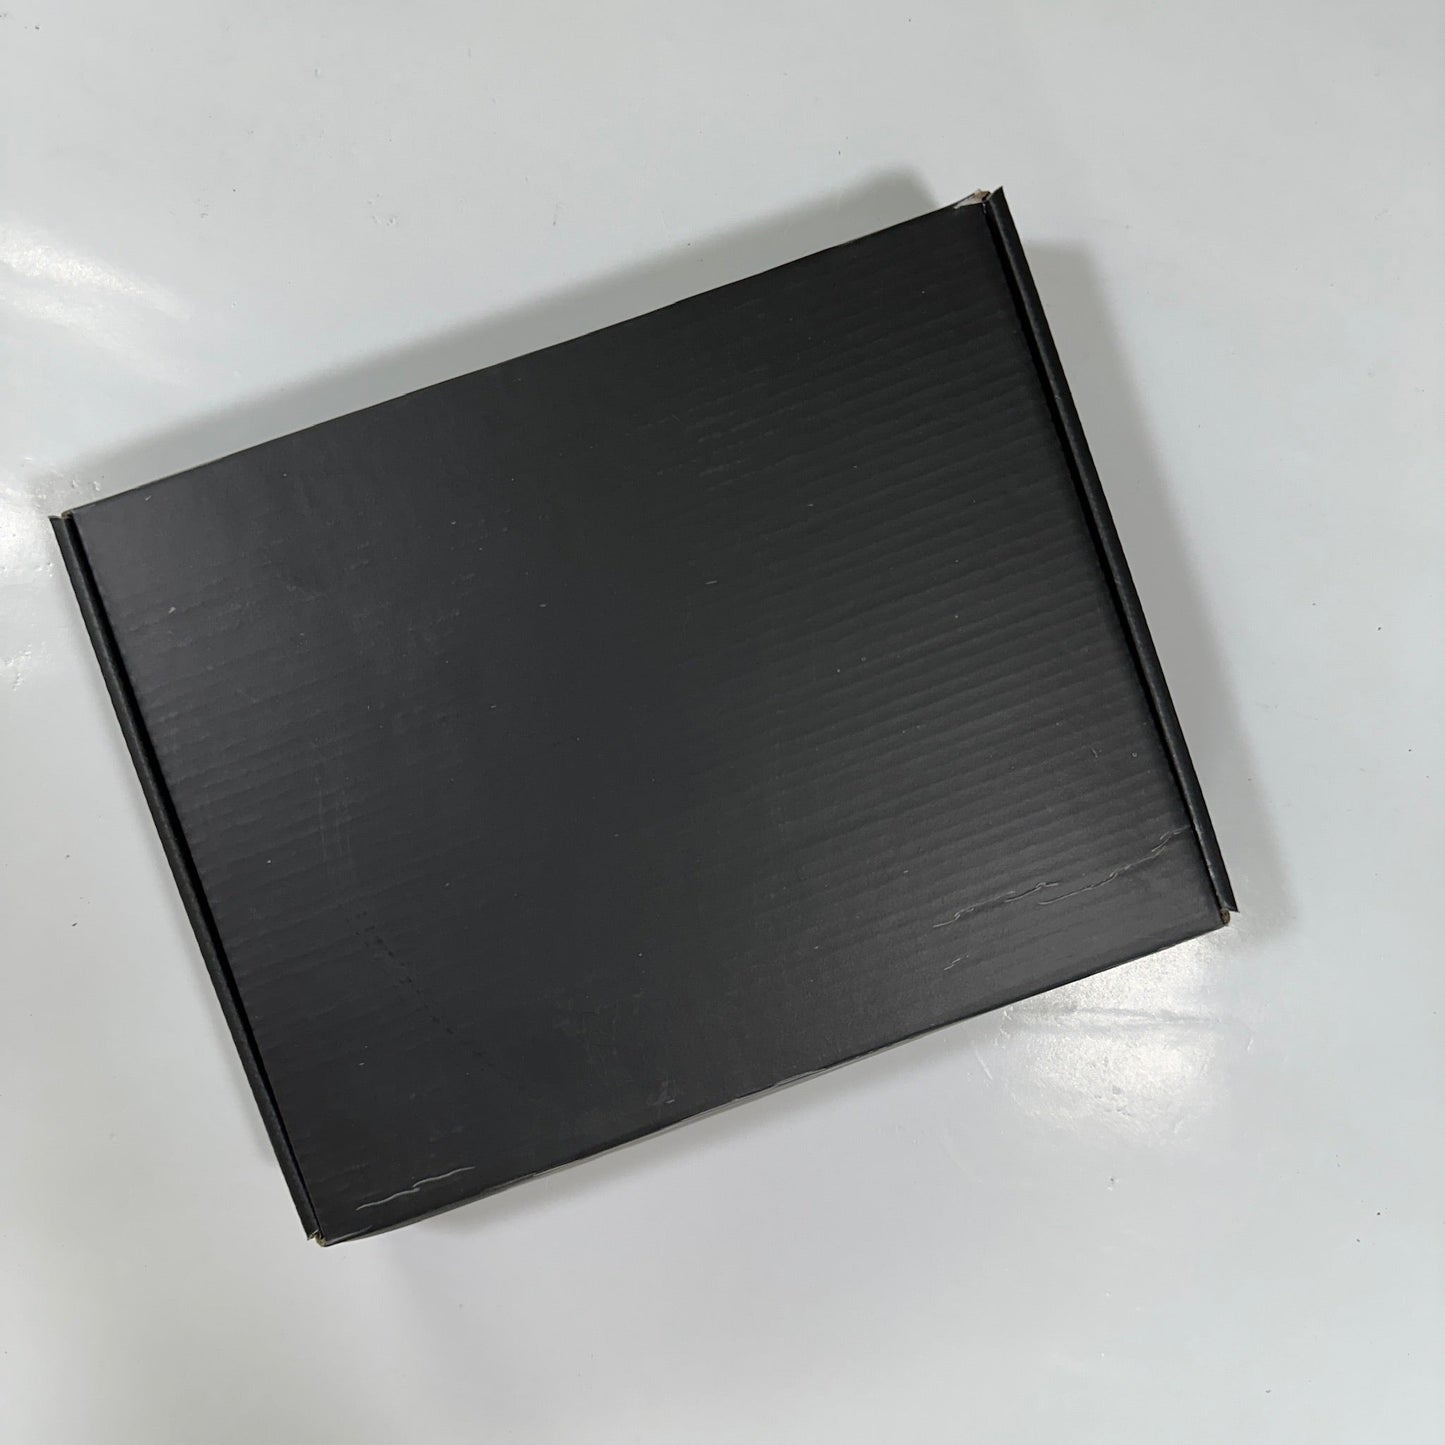 14 x 10 x 2 inch Tuck in Mailer boxes - 3 ply - Black Stock Clearance